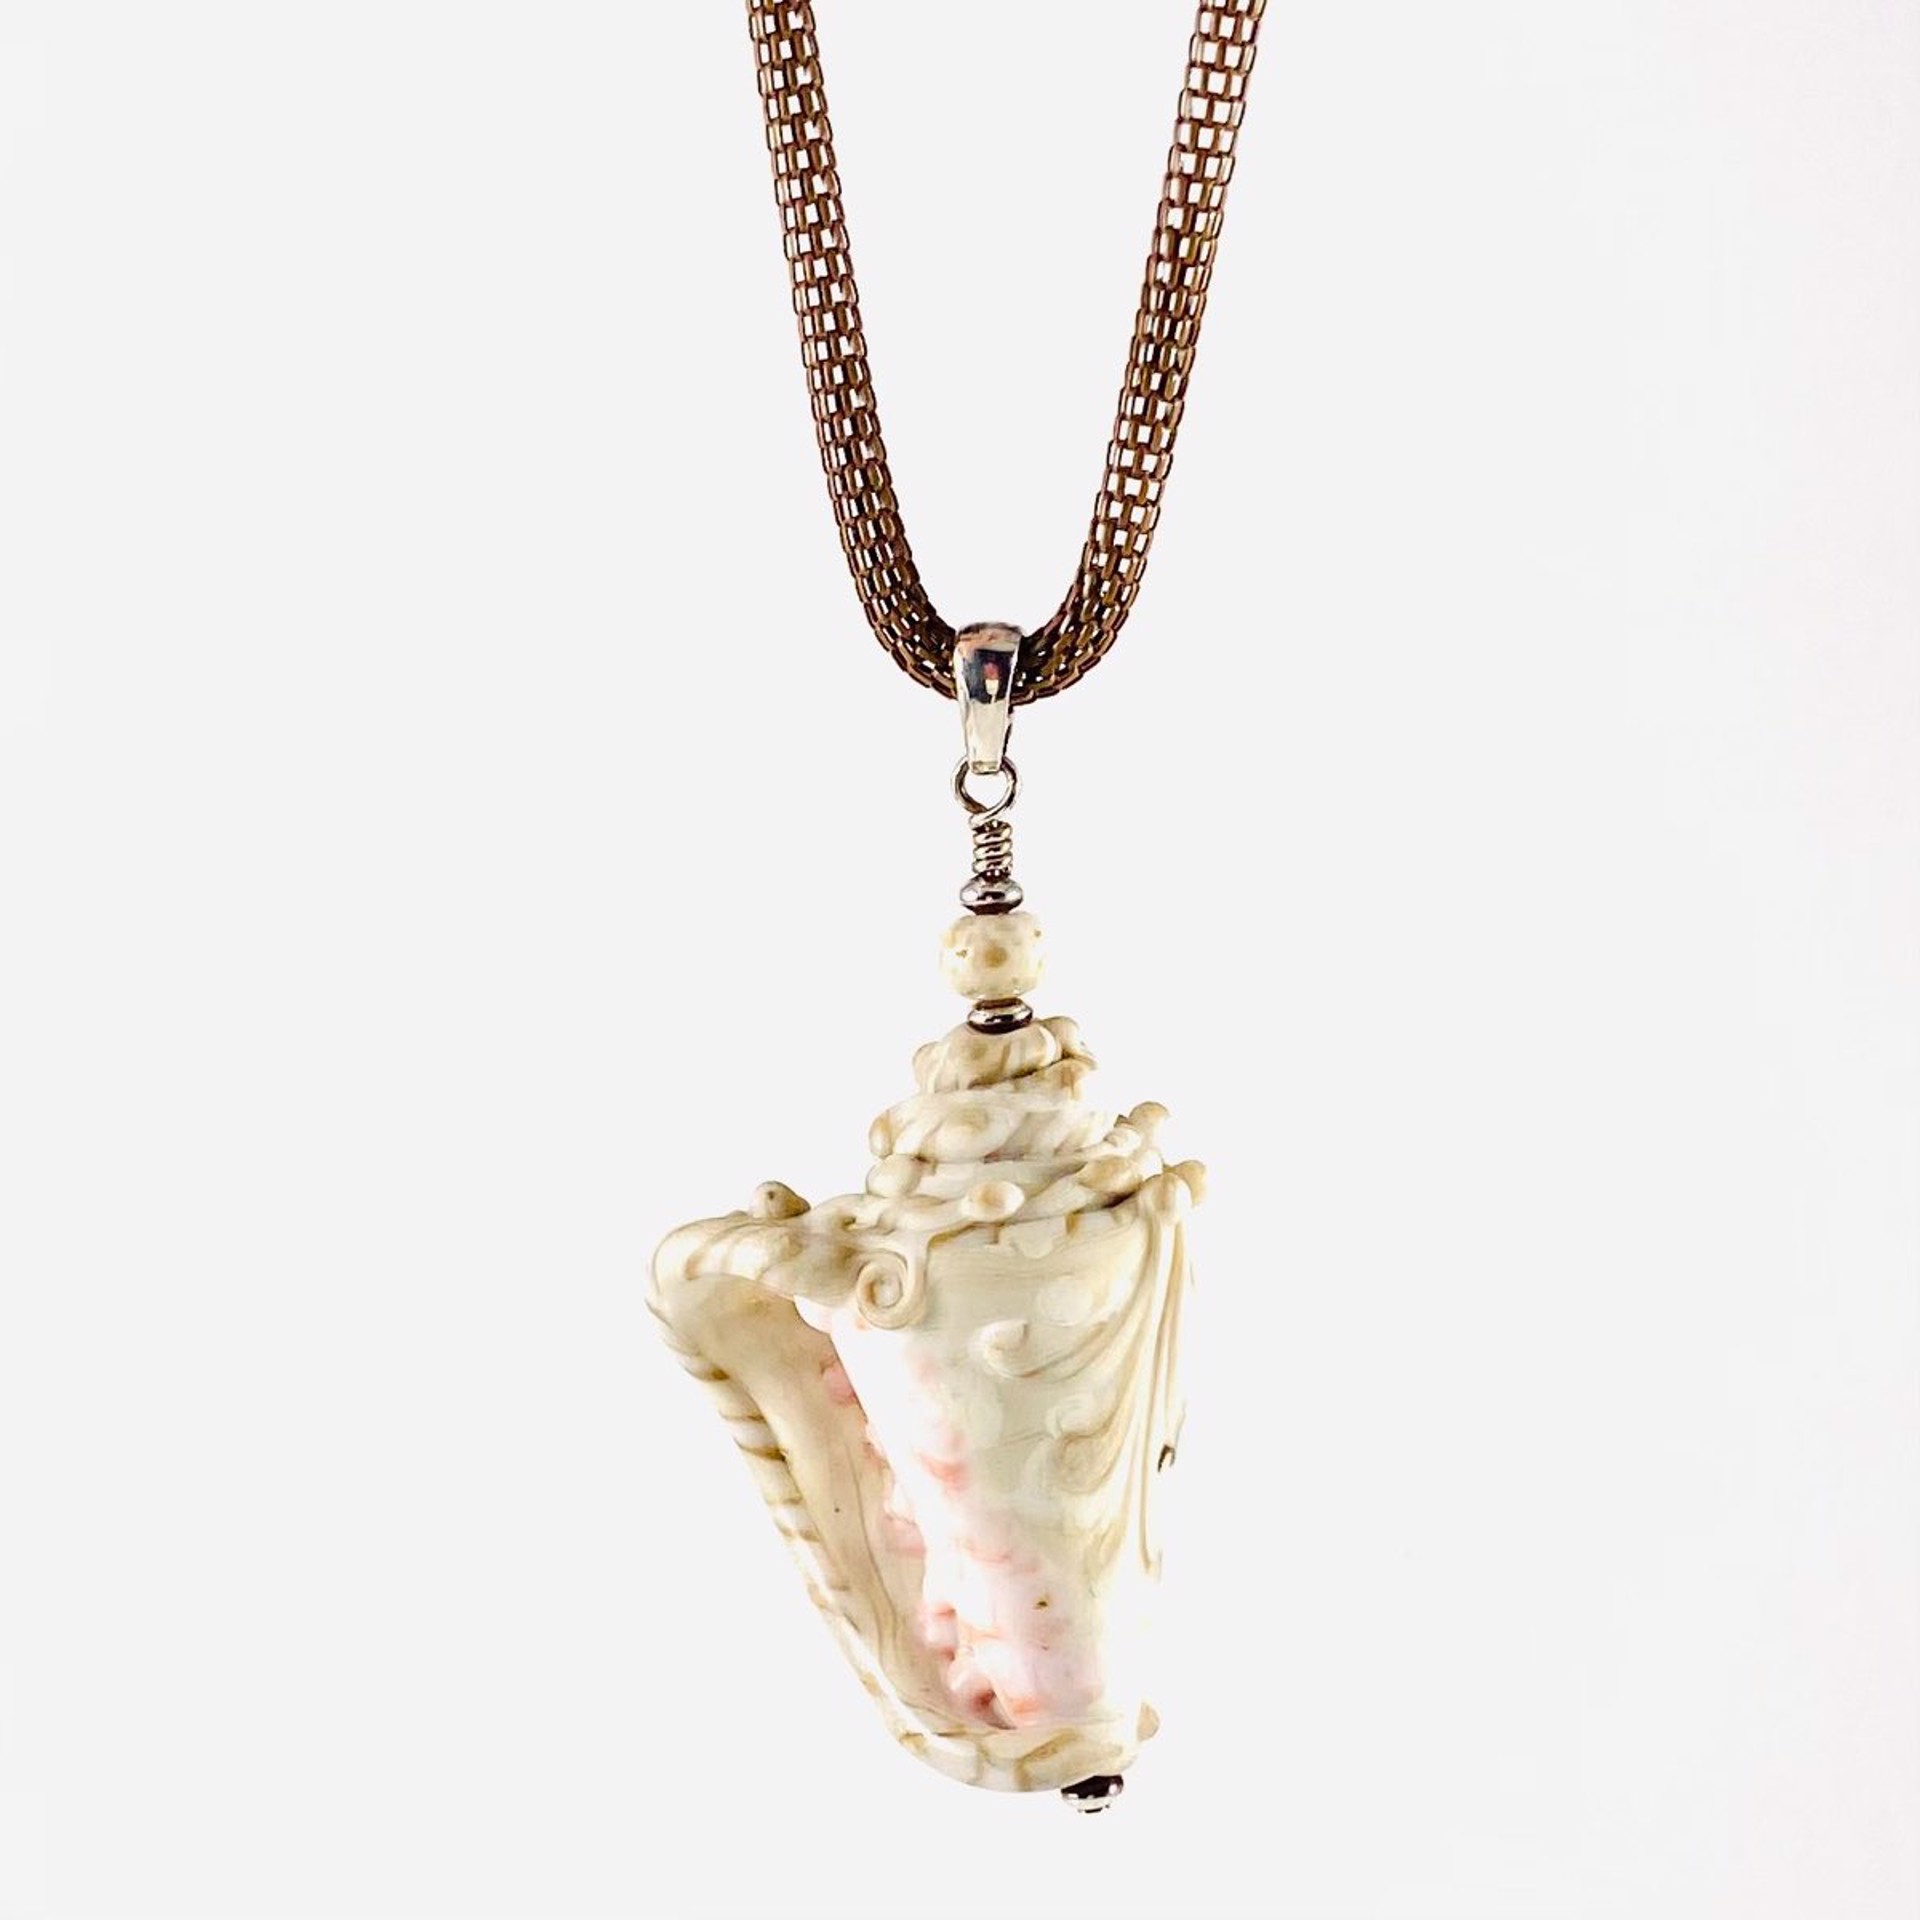 Ivory Conch Shell Pendant on Lt Brown Mesh Chain Necklace LS21-446N by Linda Sacra